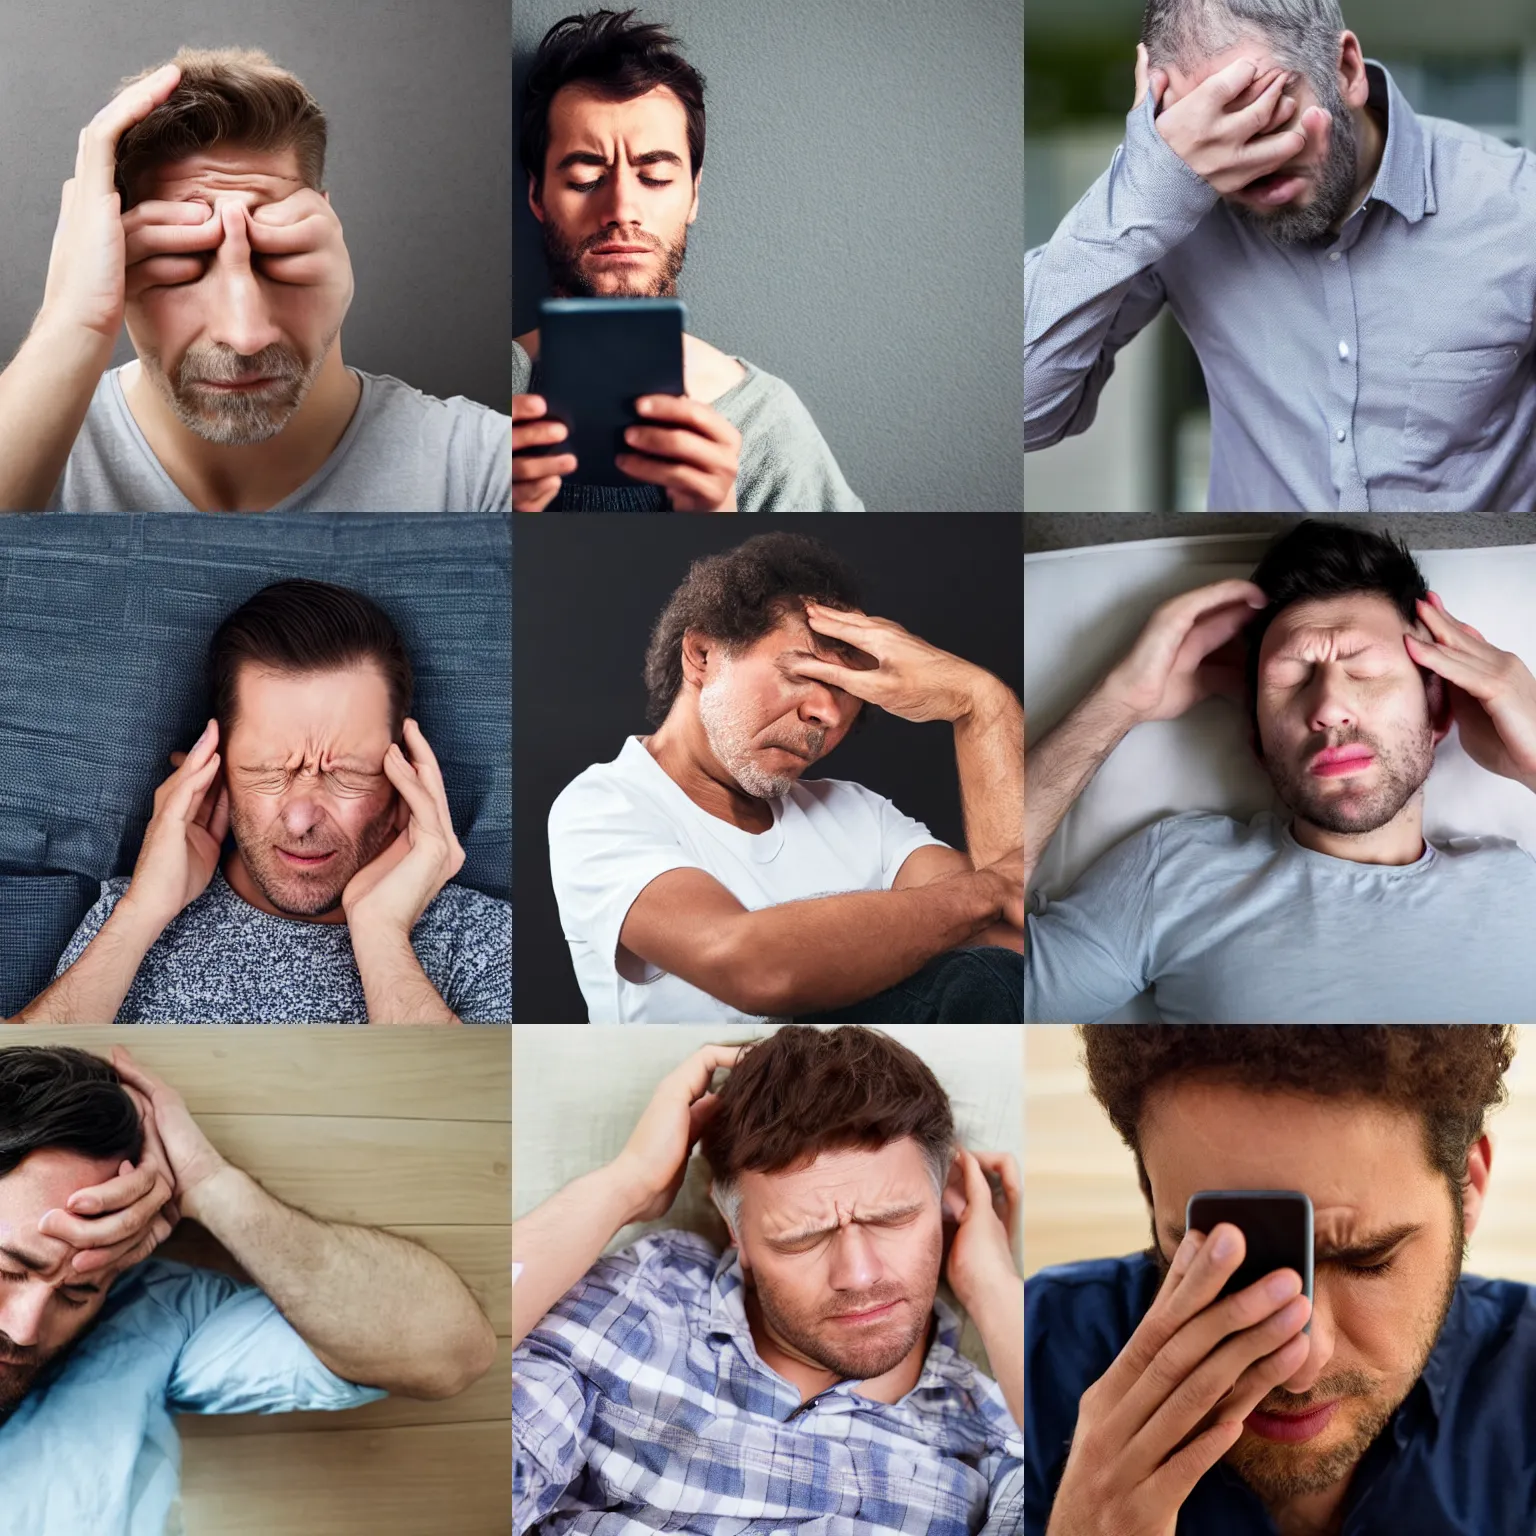 Prompt: Man in a bad, half asleep blinded by smartphone